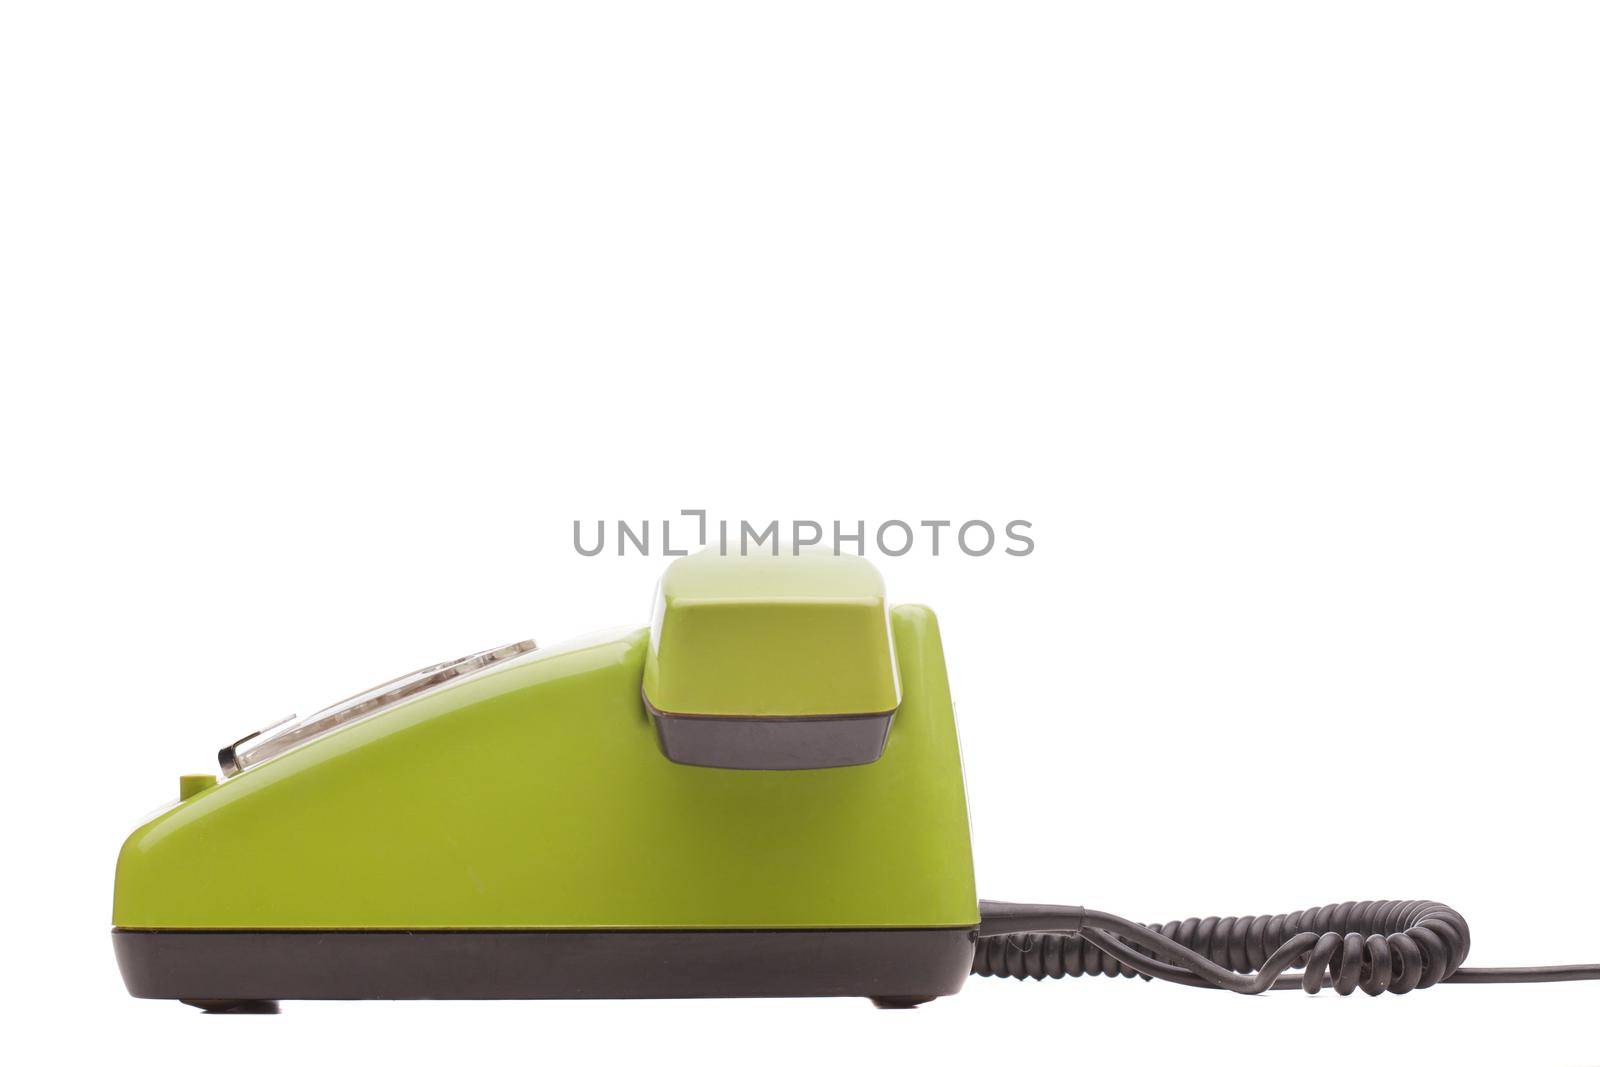 Green telephone retro style on white background. Vintage phone handset receiver.